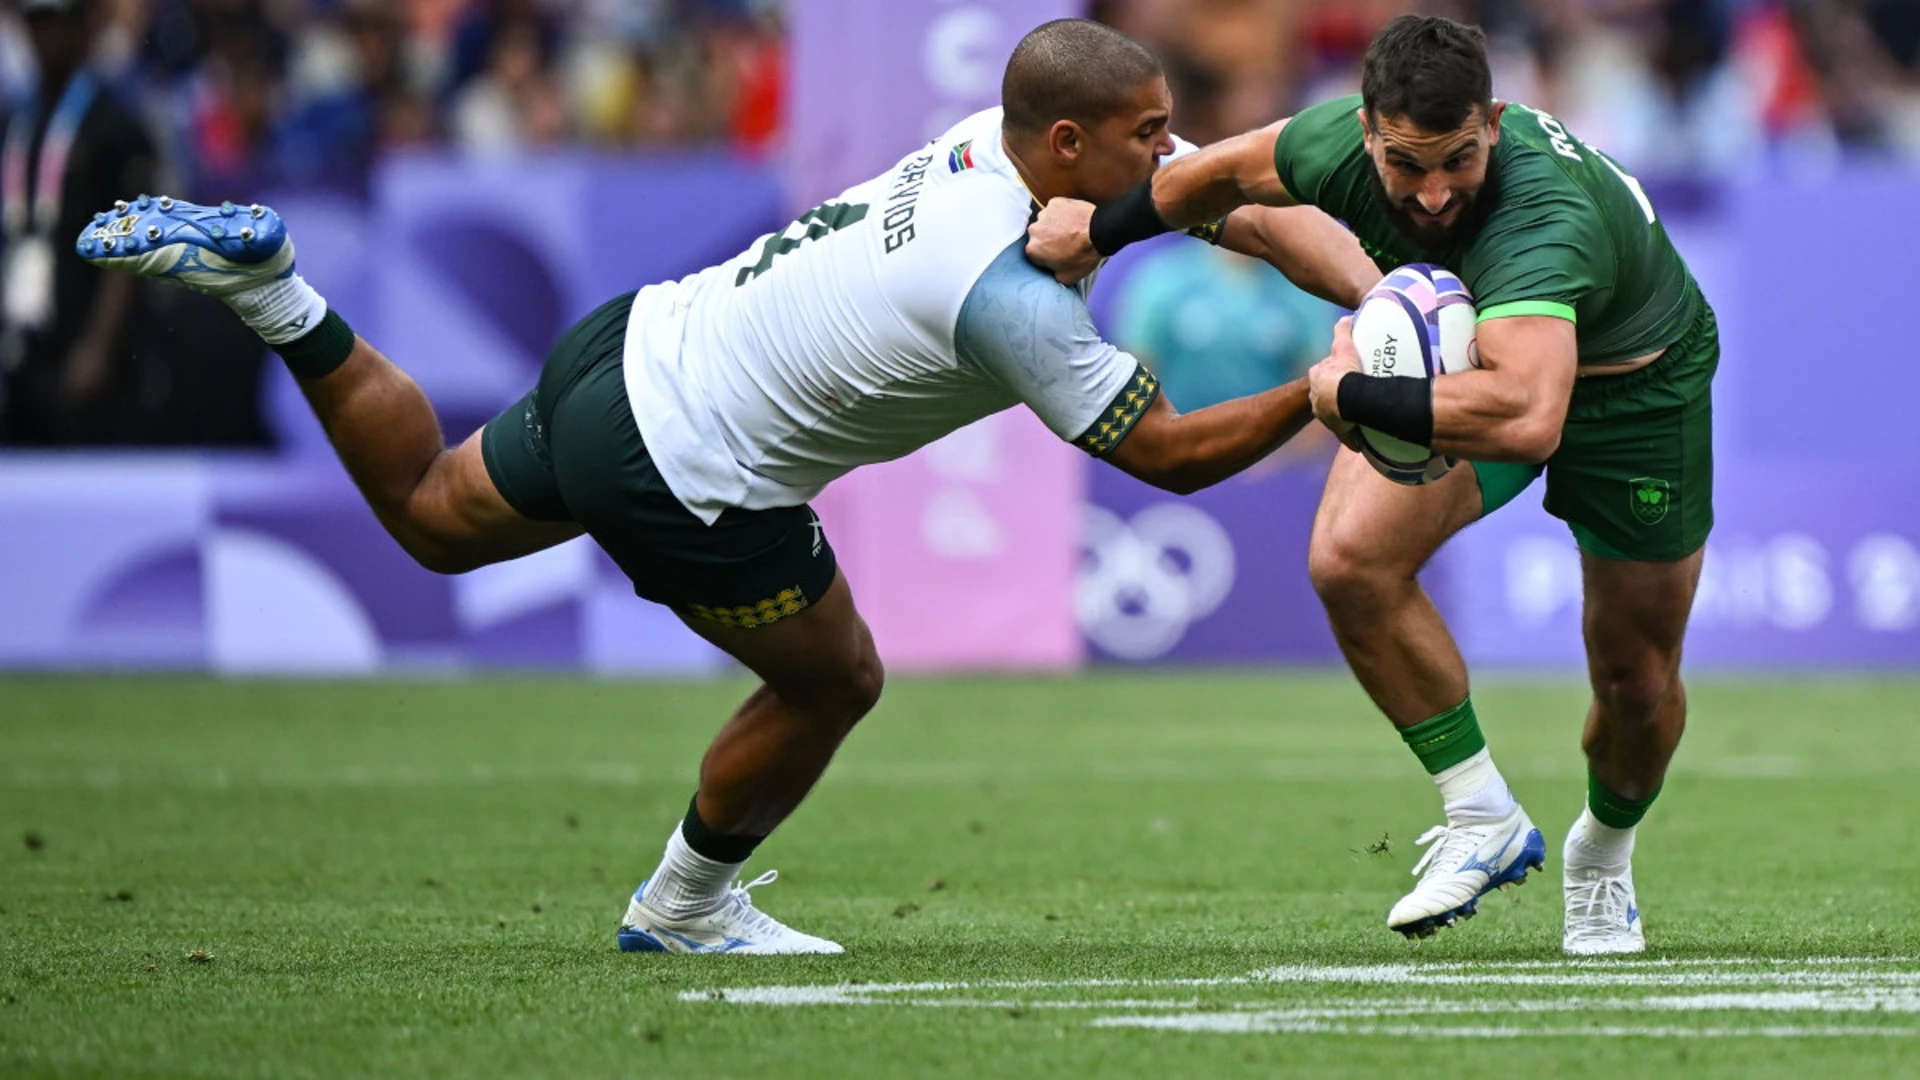 Blitzboks' Olympic campaign hangs by a thread after opening loss